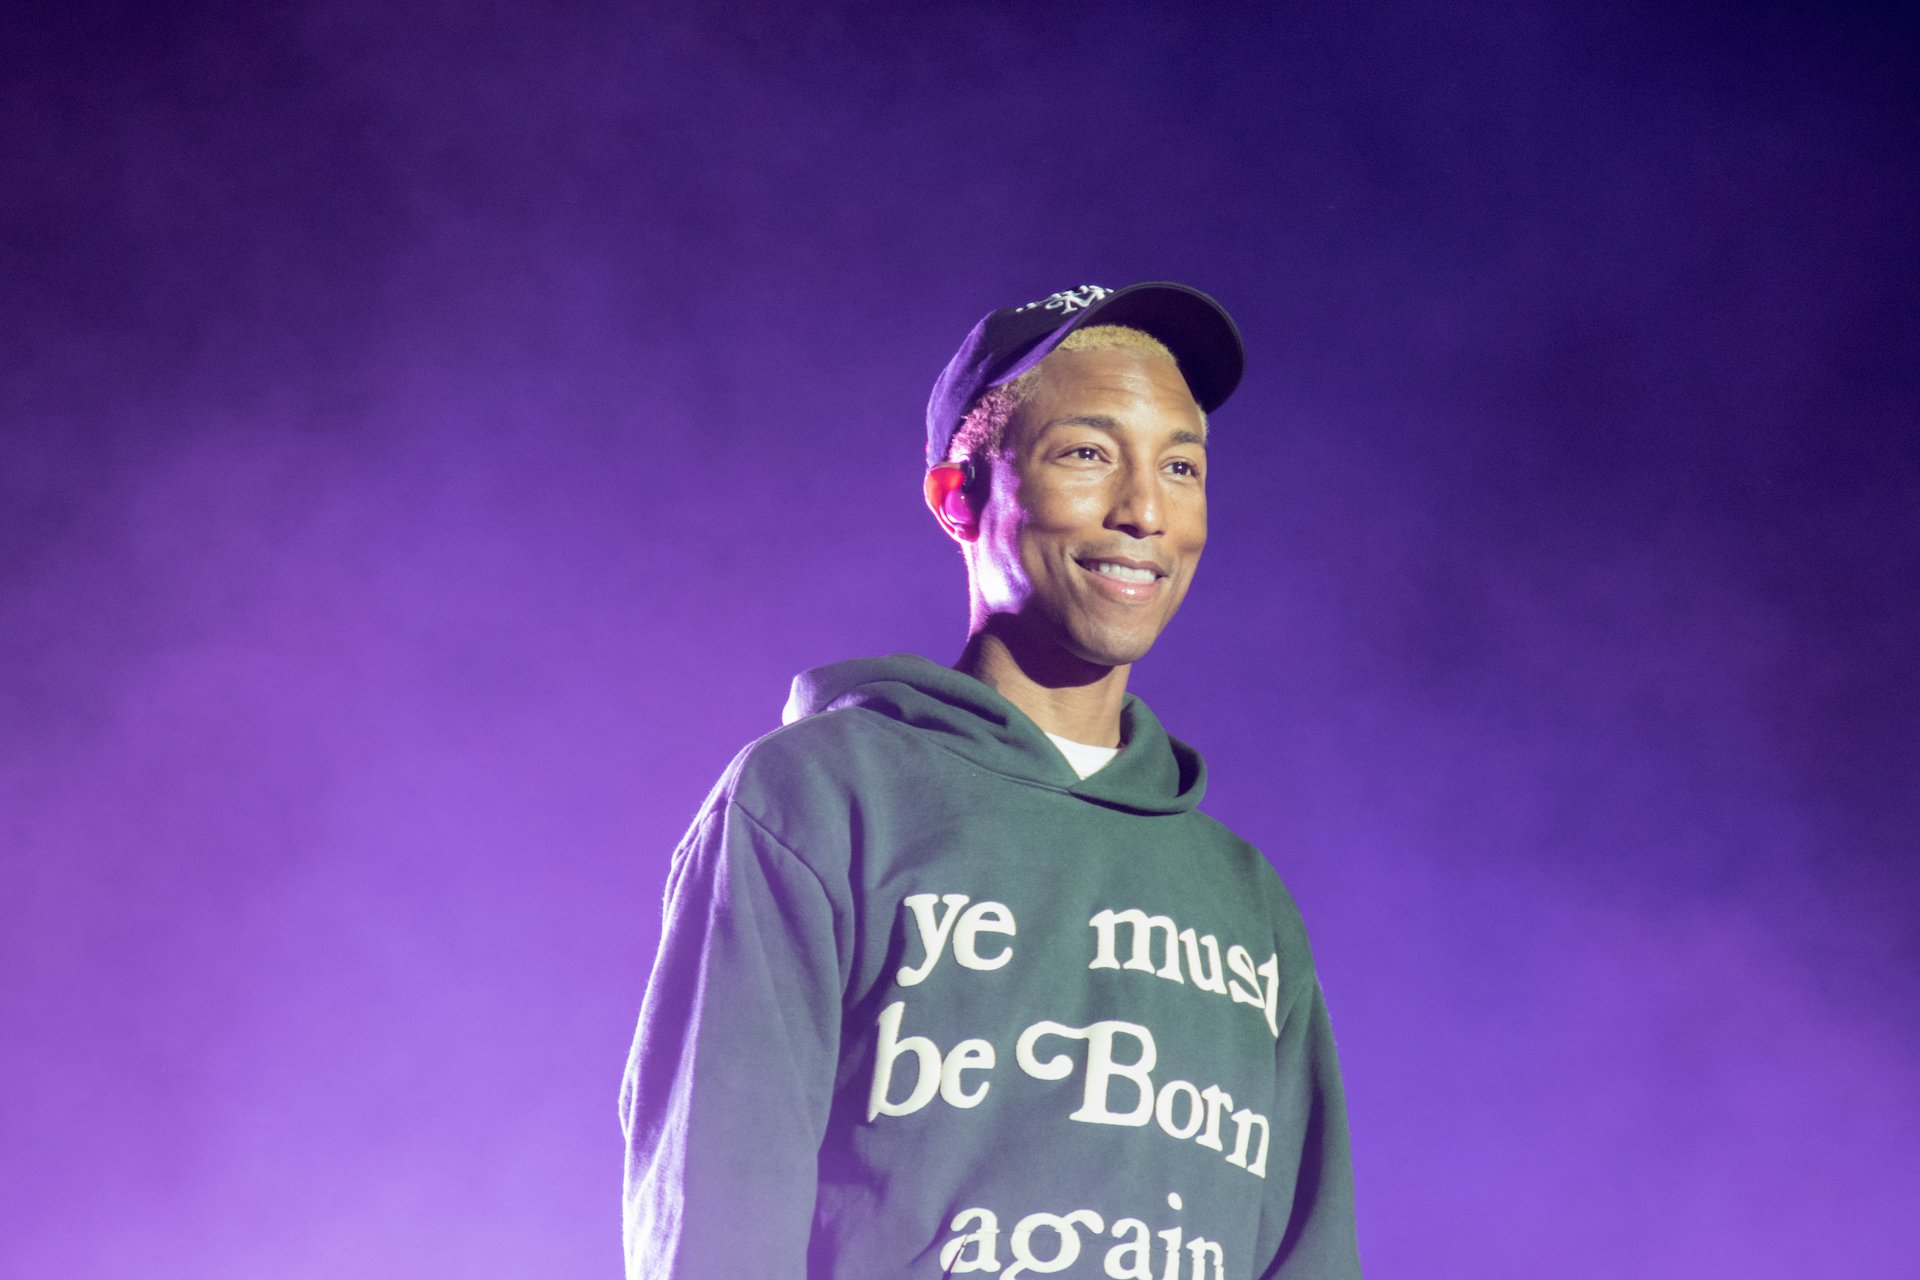 Pharrell Williams revealed the exciting news about his new album 